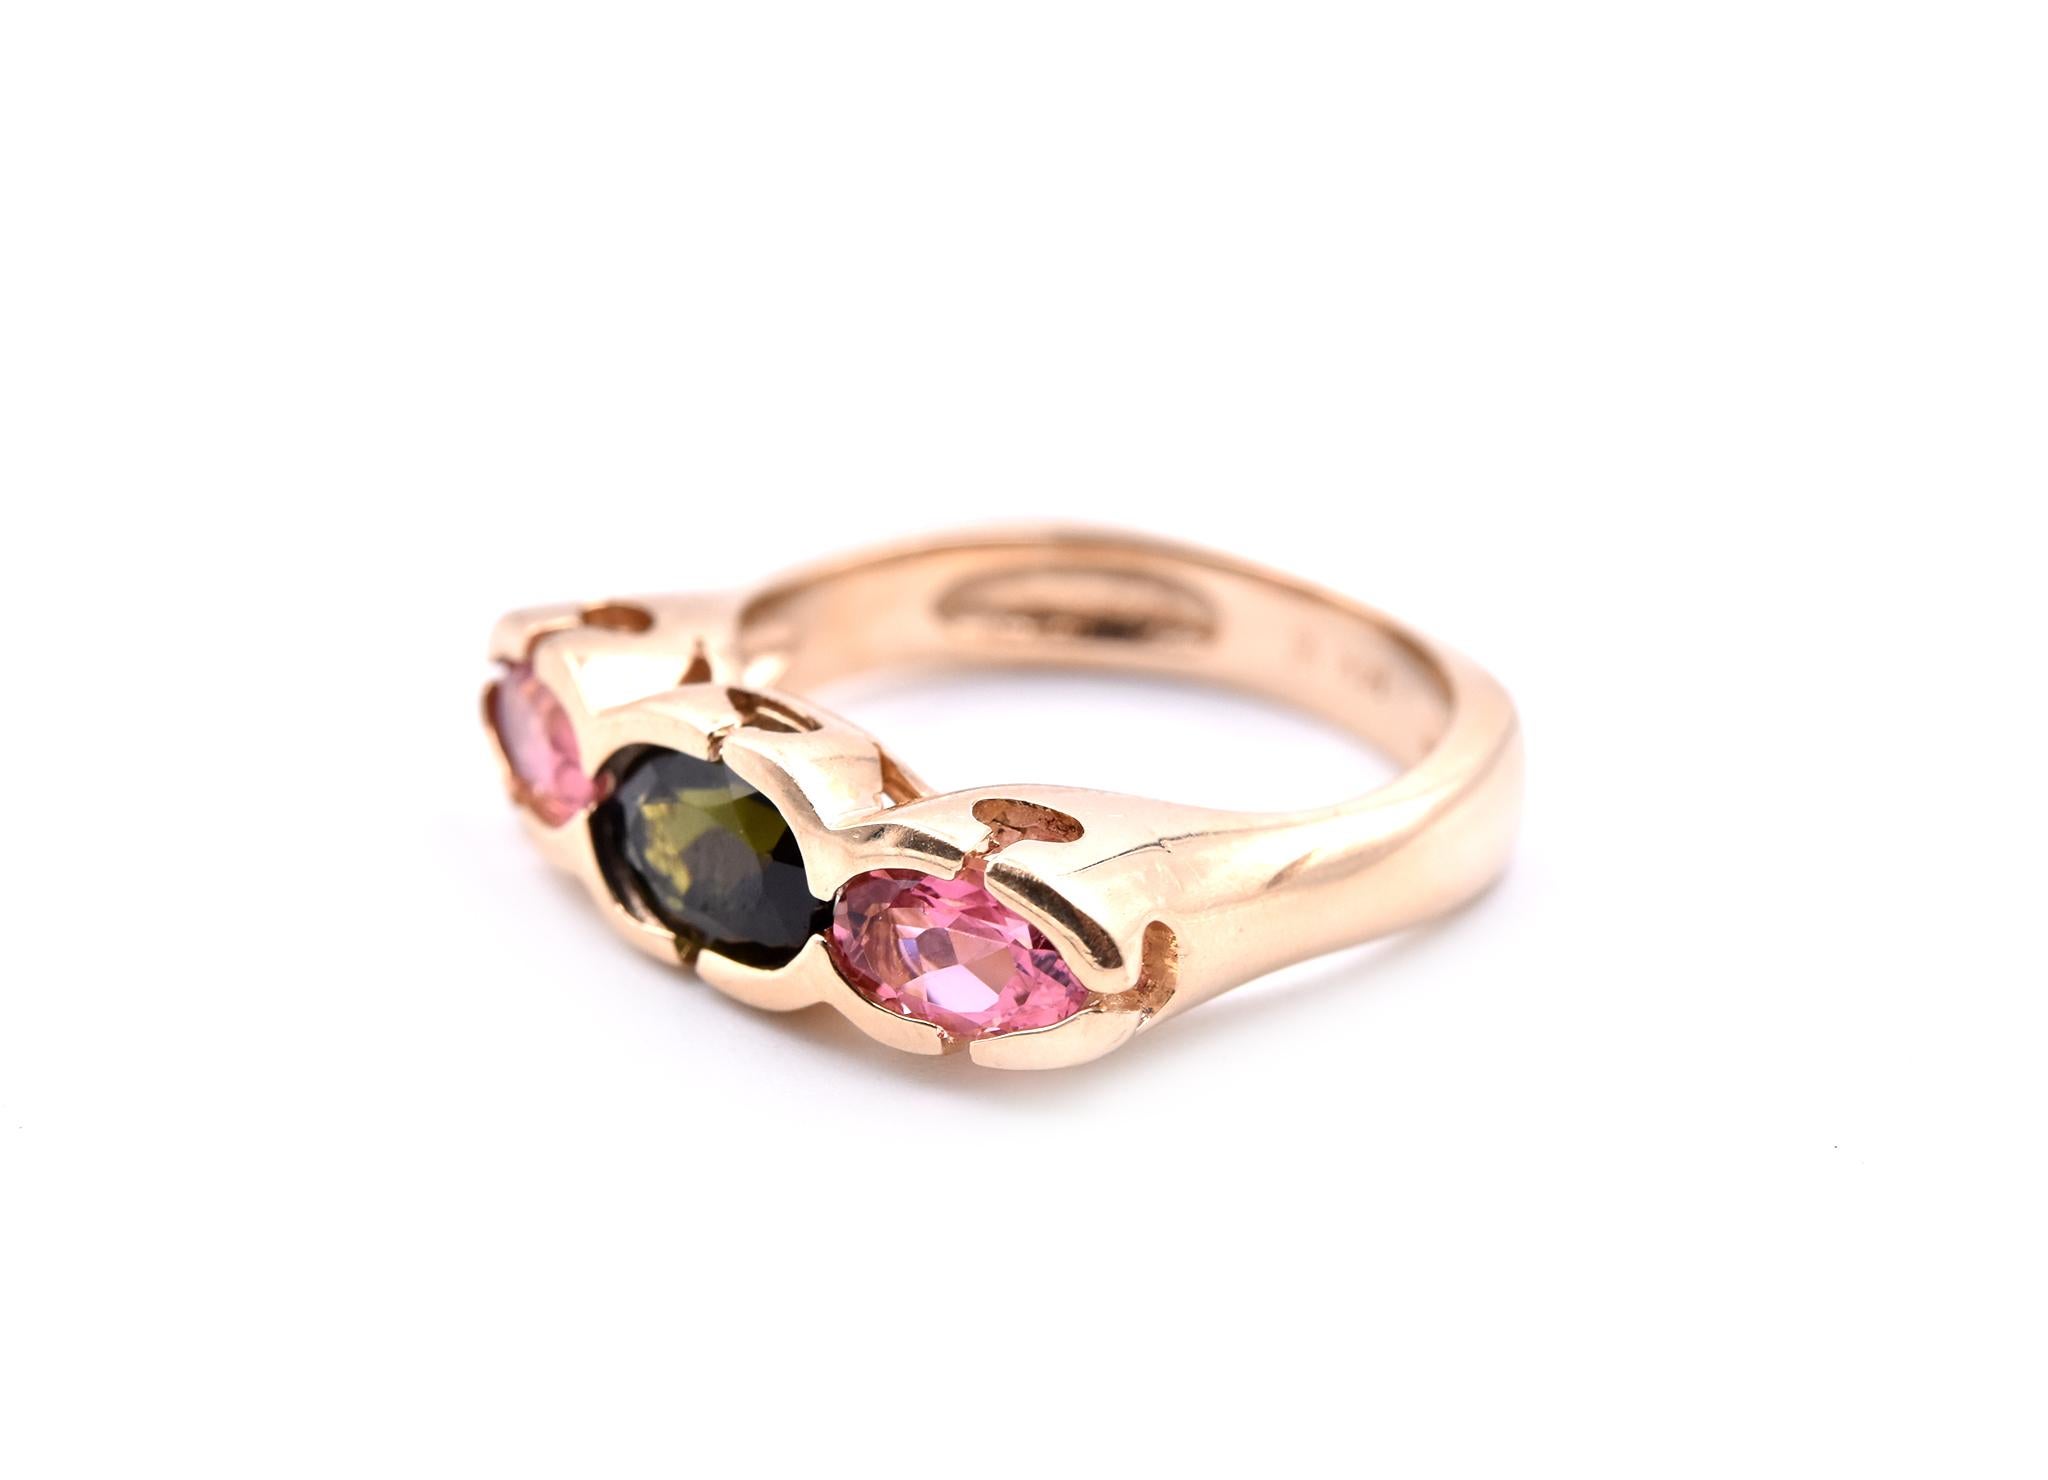 Designer: custom design
Material: 14k yellow gold
Size: 6 (please allow two additional shipping days for sizing requests)
Dimensions: ring top is 21.30mm by 6.30mm 
Weight: 5.5 grams
